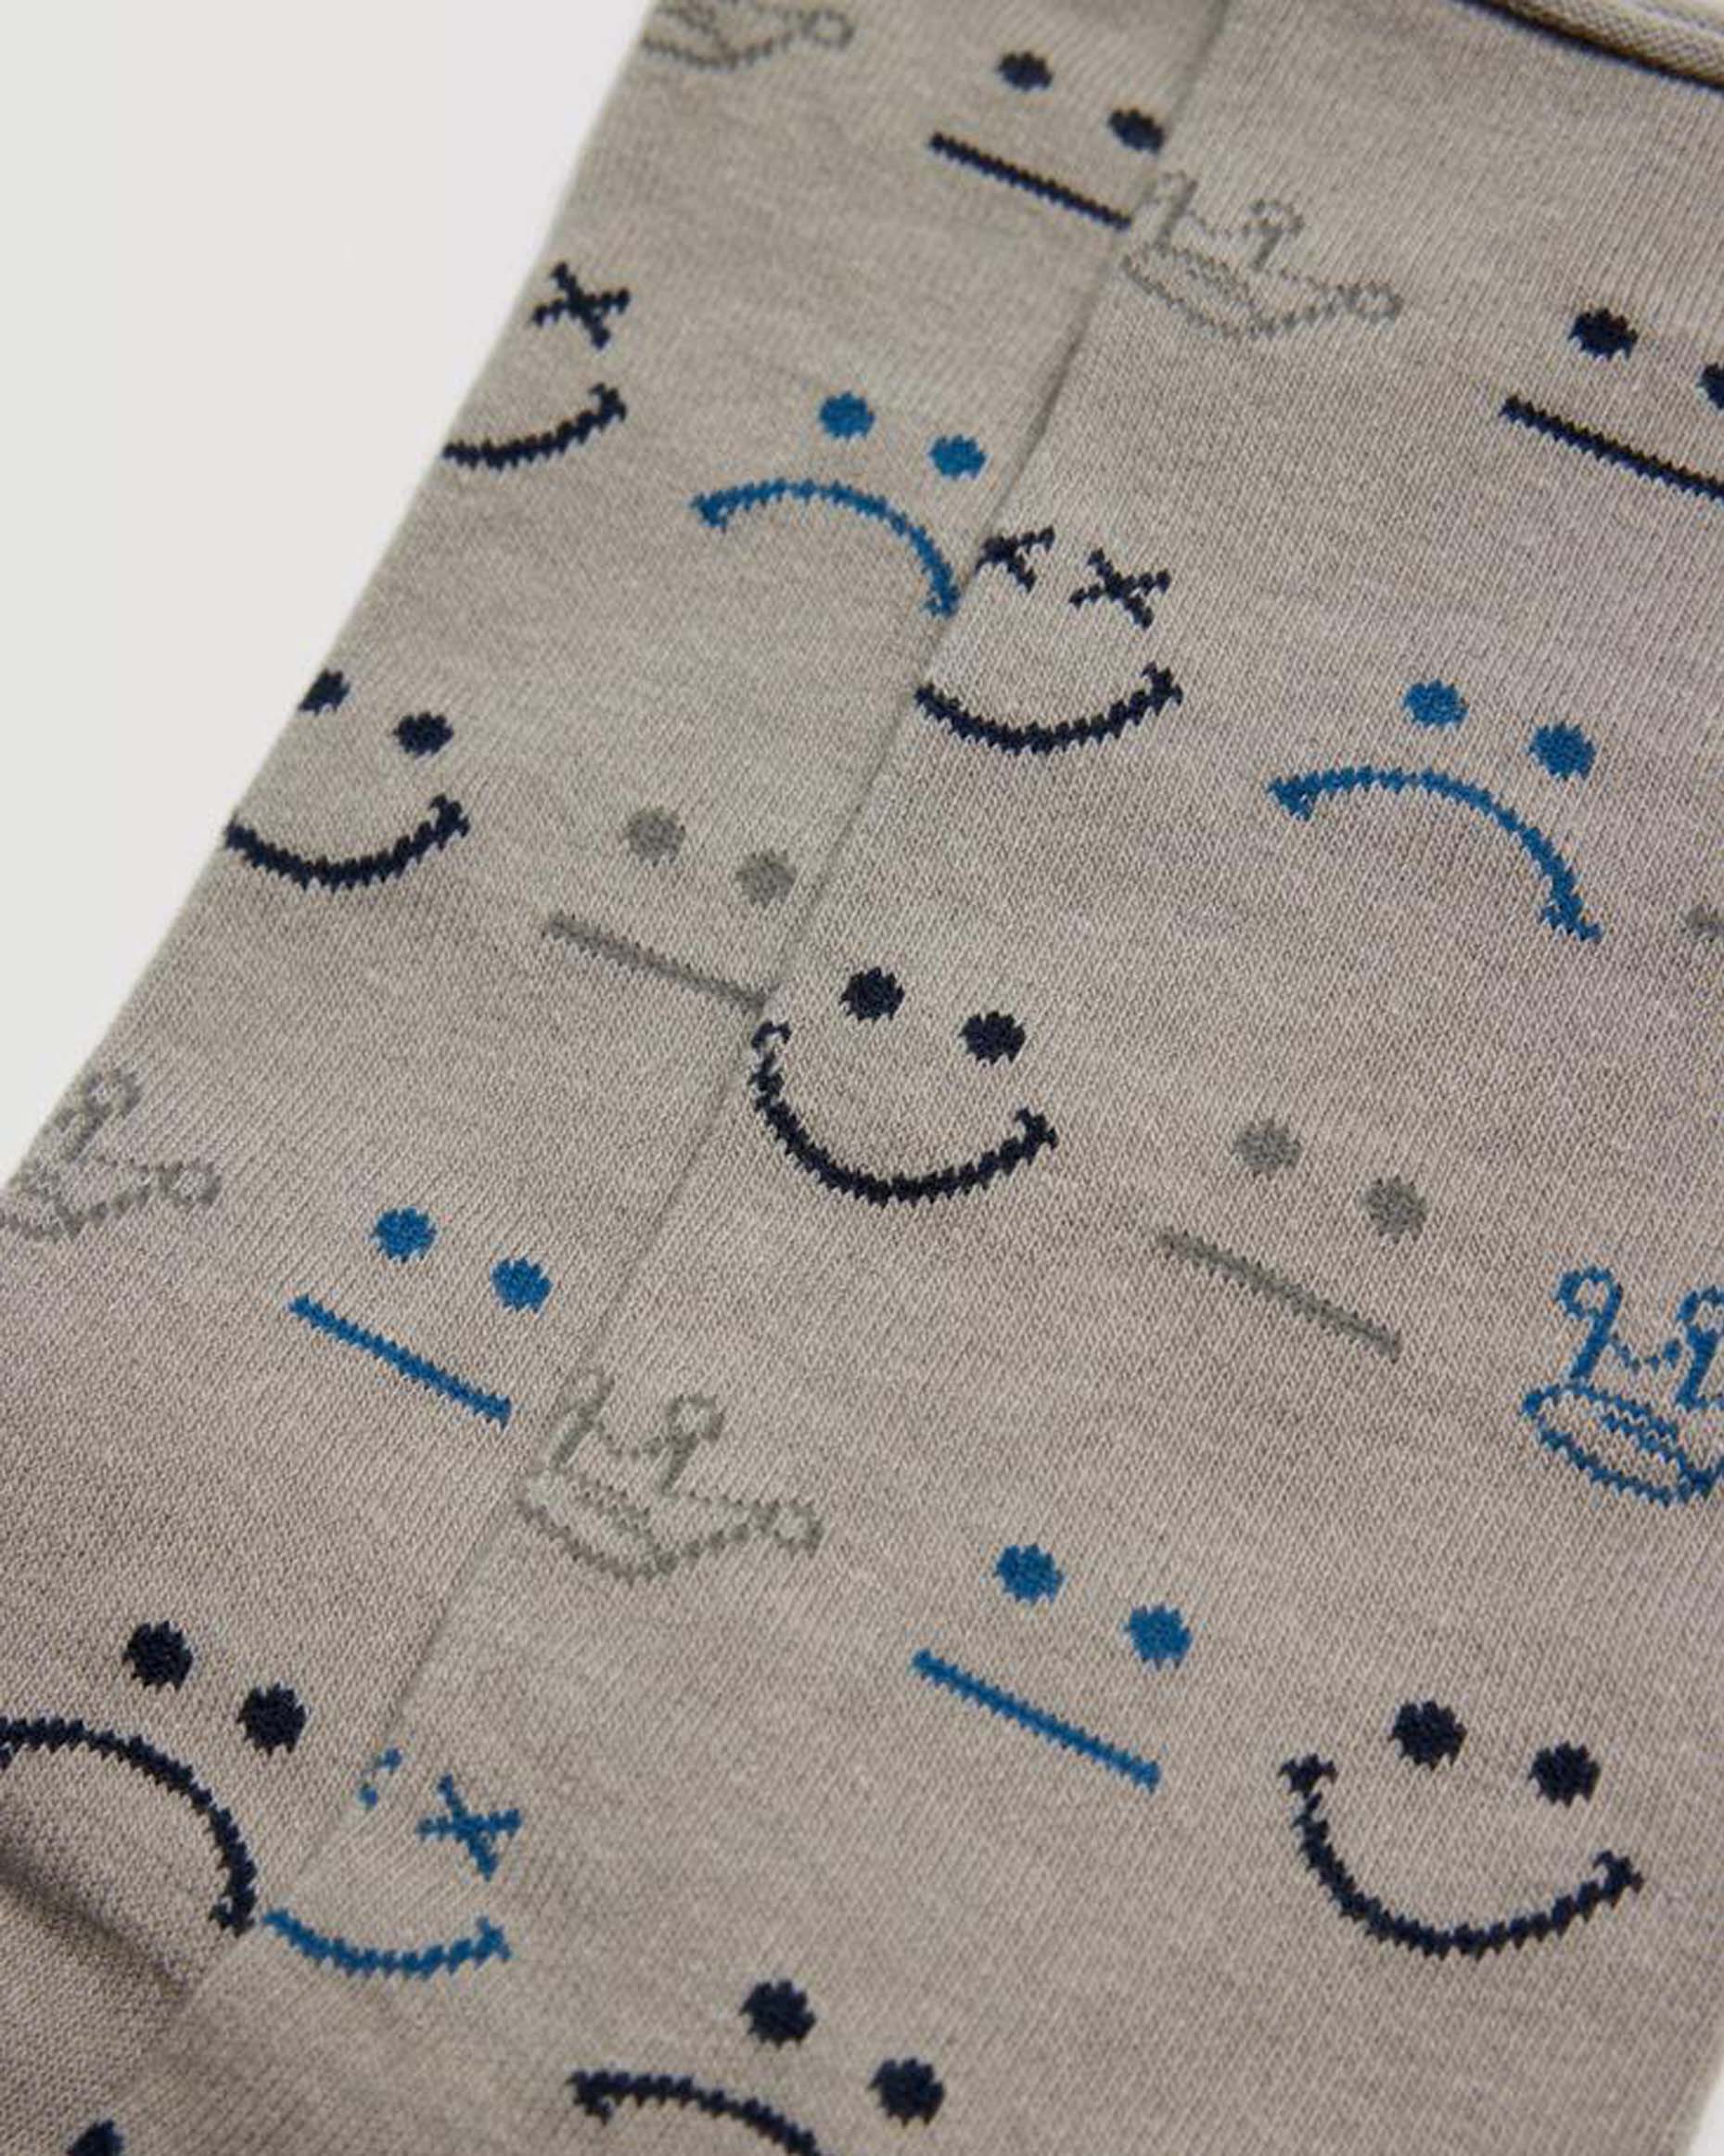 Light grey cotton mix crew length no cuff ankle socks with an all over assorted doodle faces and crown pattern in blue, black and grey.